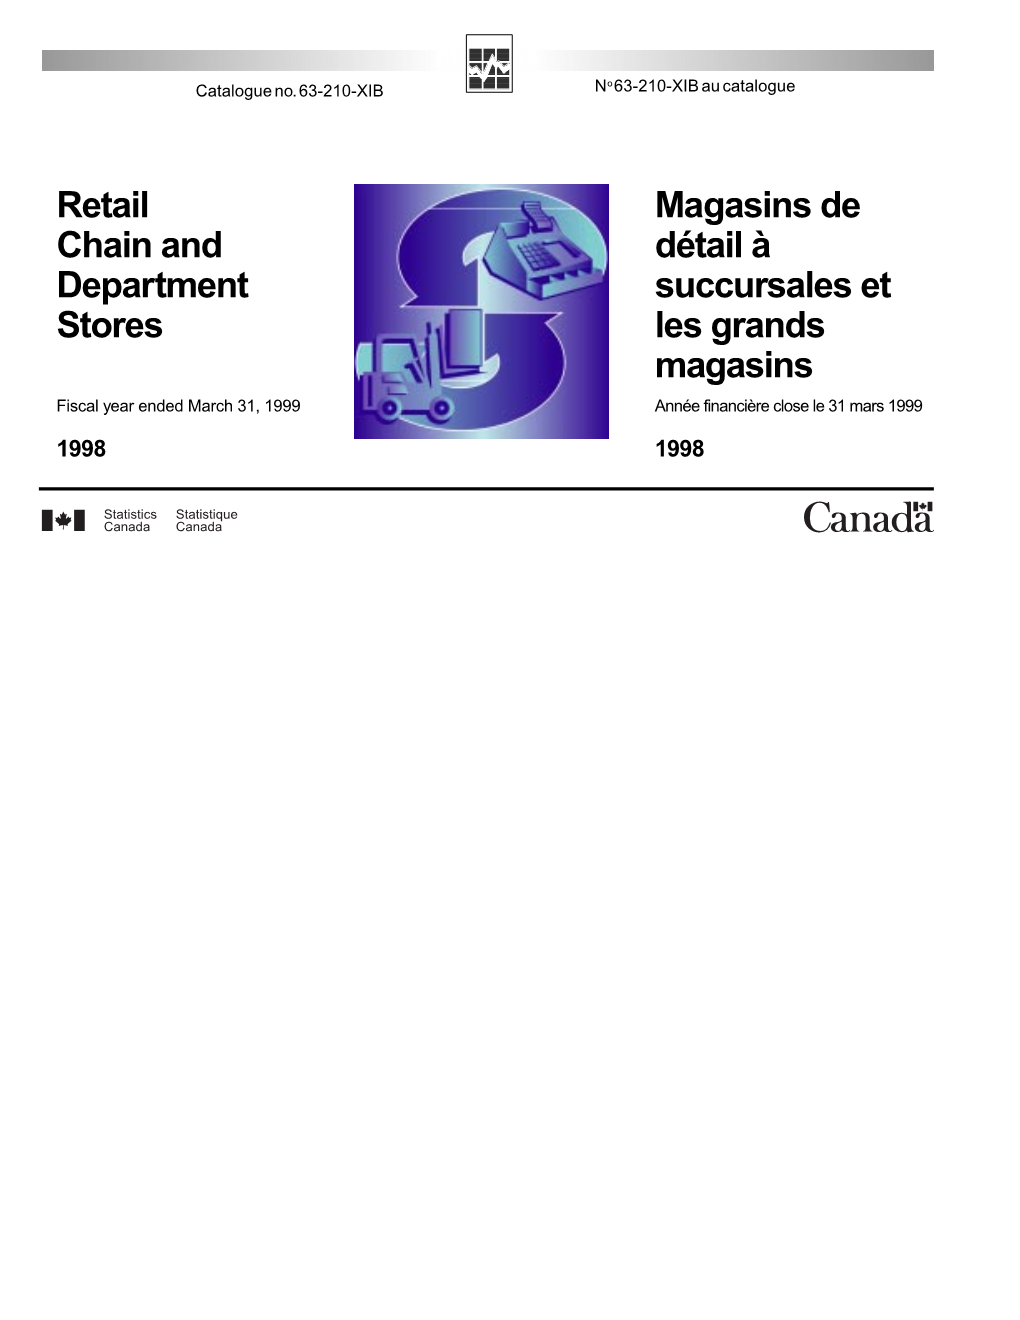 Retail Chain and Department Stores Magasins De